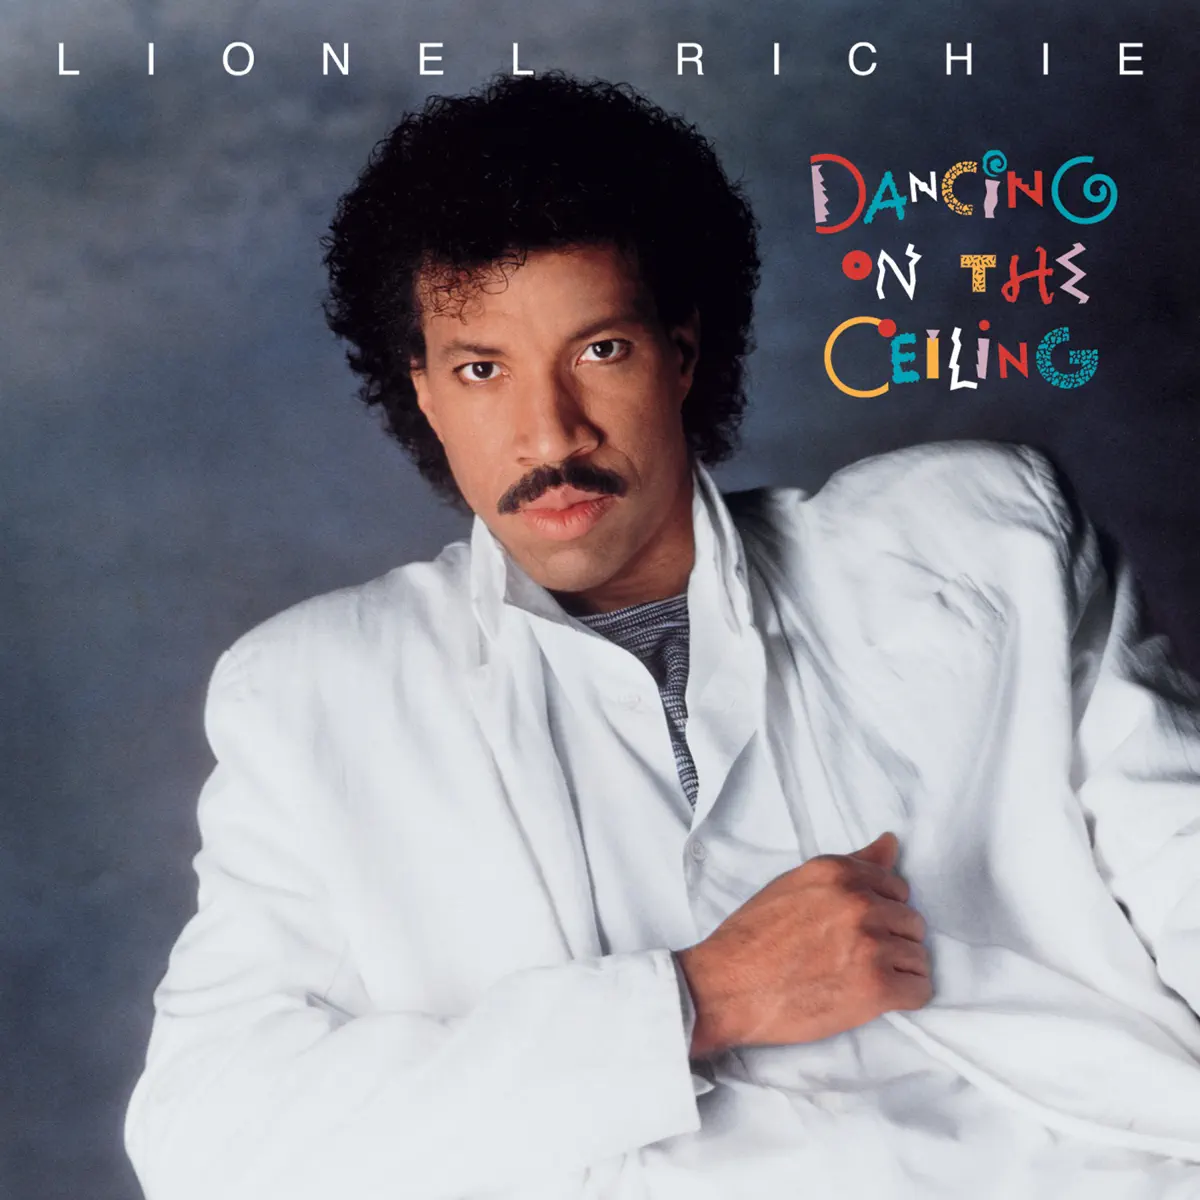 Lionel Richie - Dancing On the Ceiling [Apple Digital Master] (1985) [iTunes Plus AAC M4A]-新房子